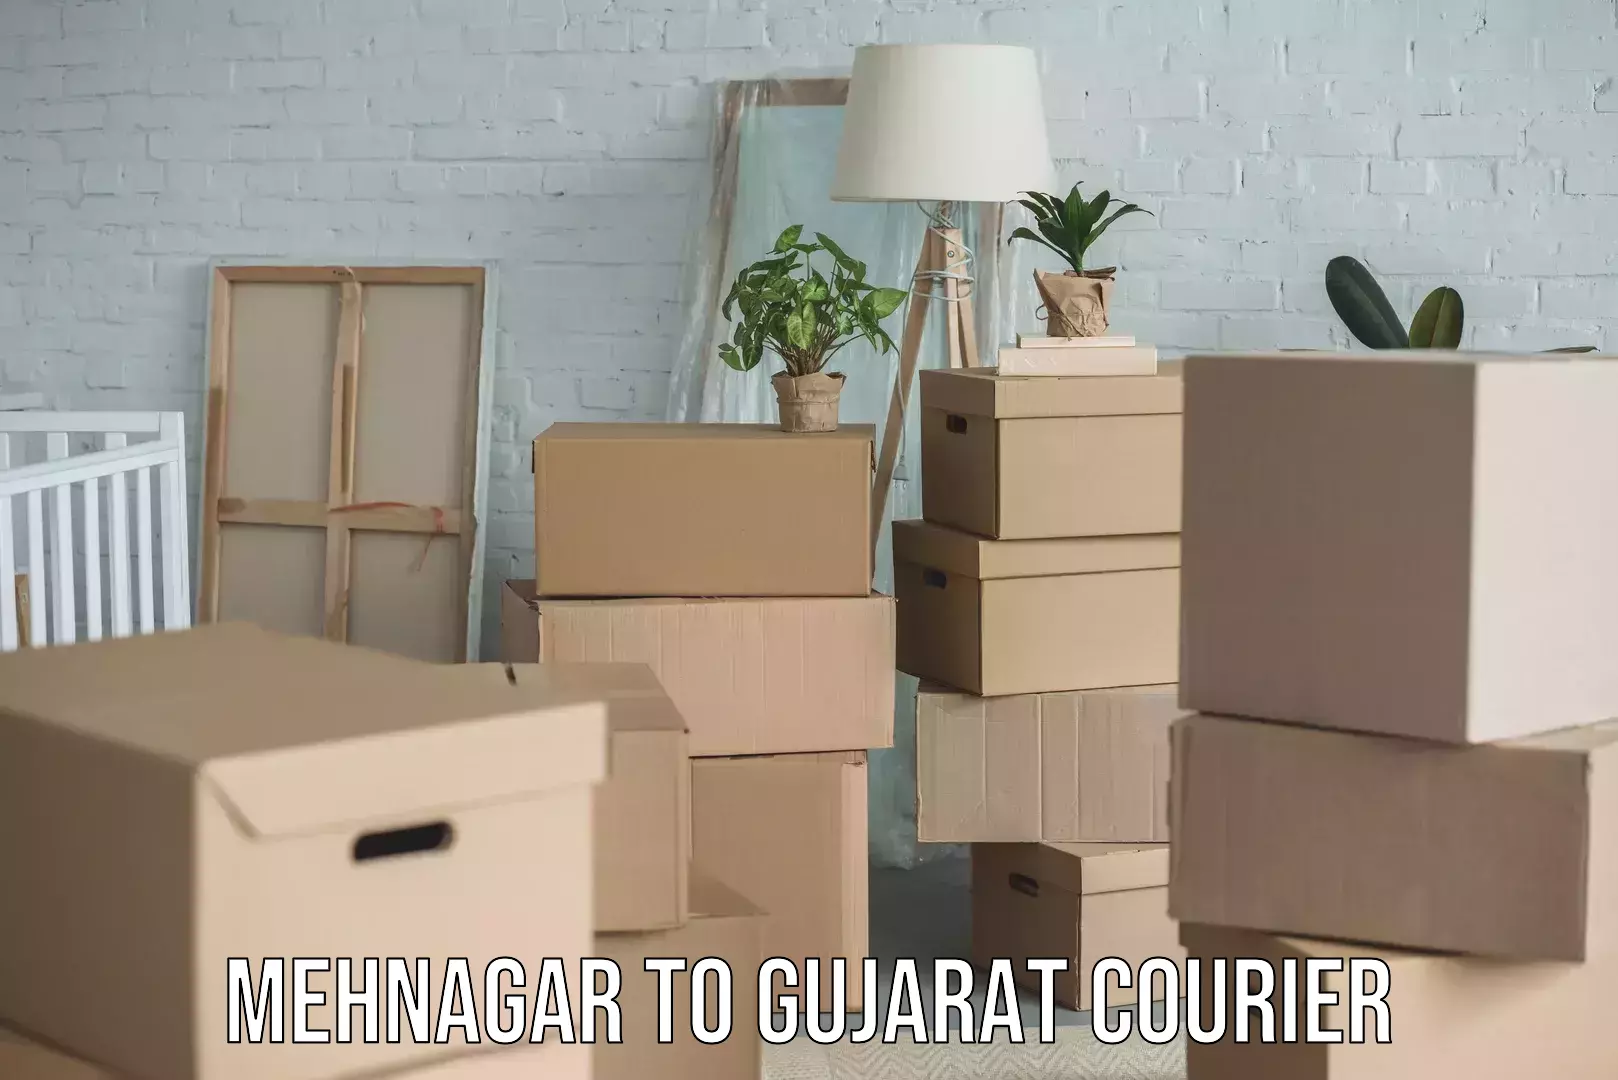 Trusted moving company Mehnagar to Gujarat